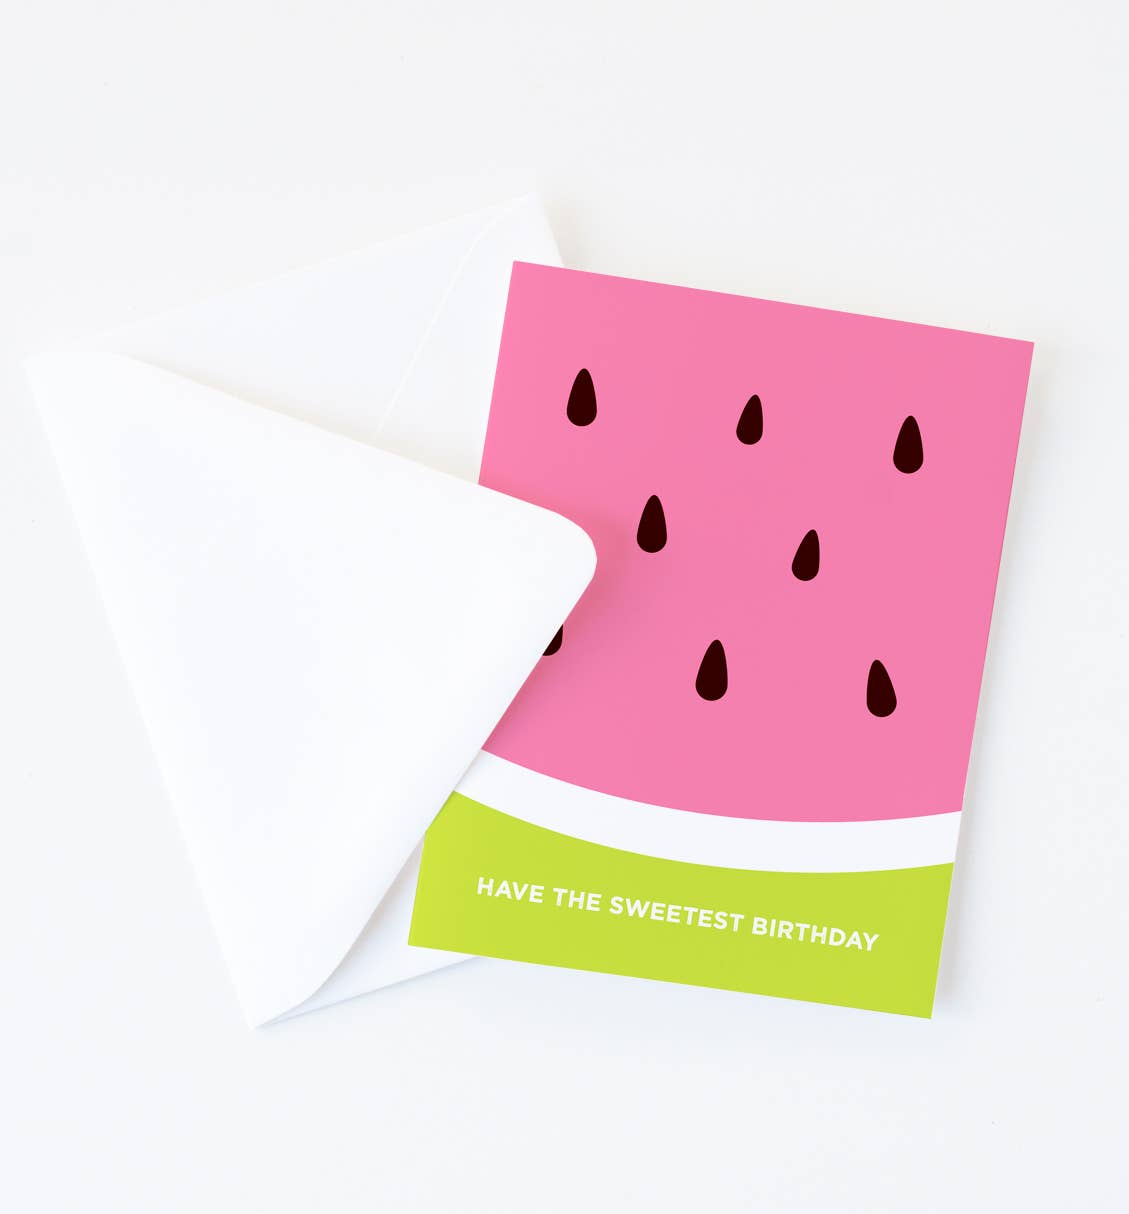 Graphic Anthology - Sweetest Birthday Greeting Card